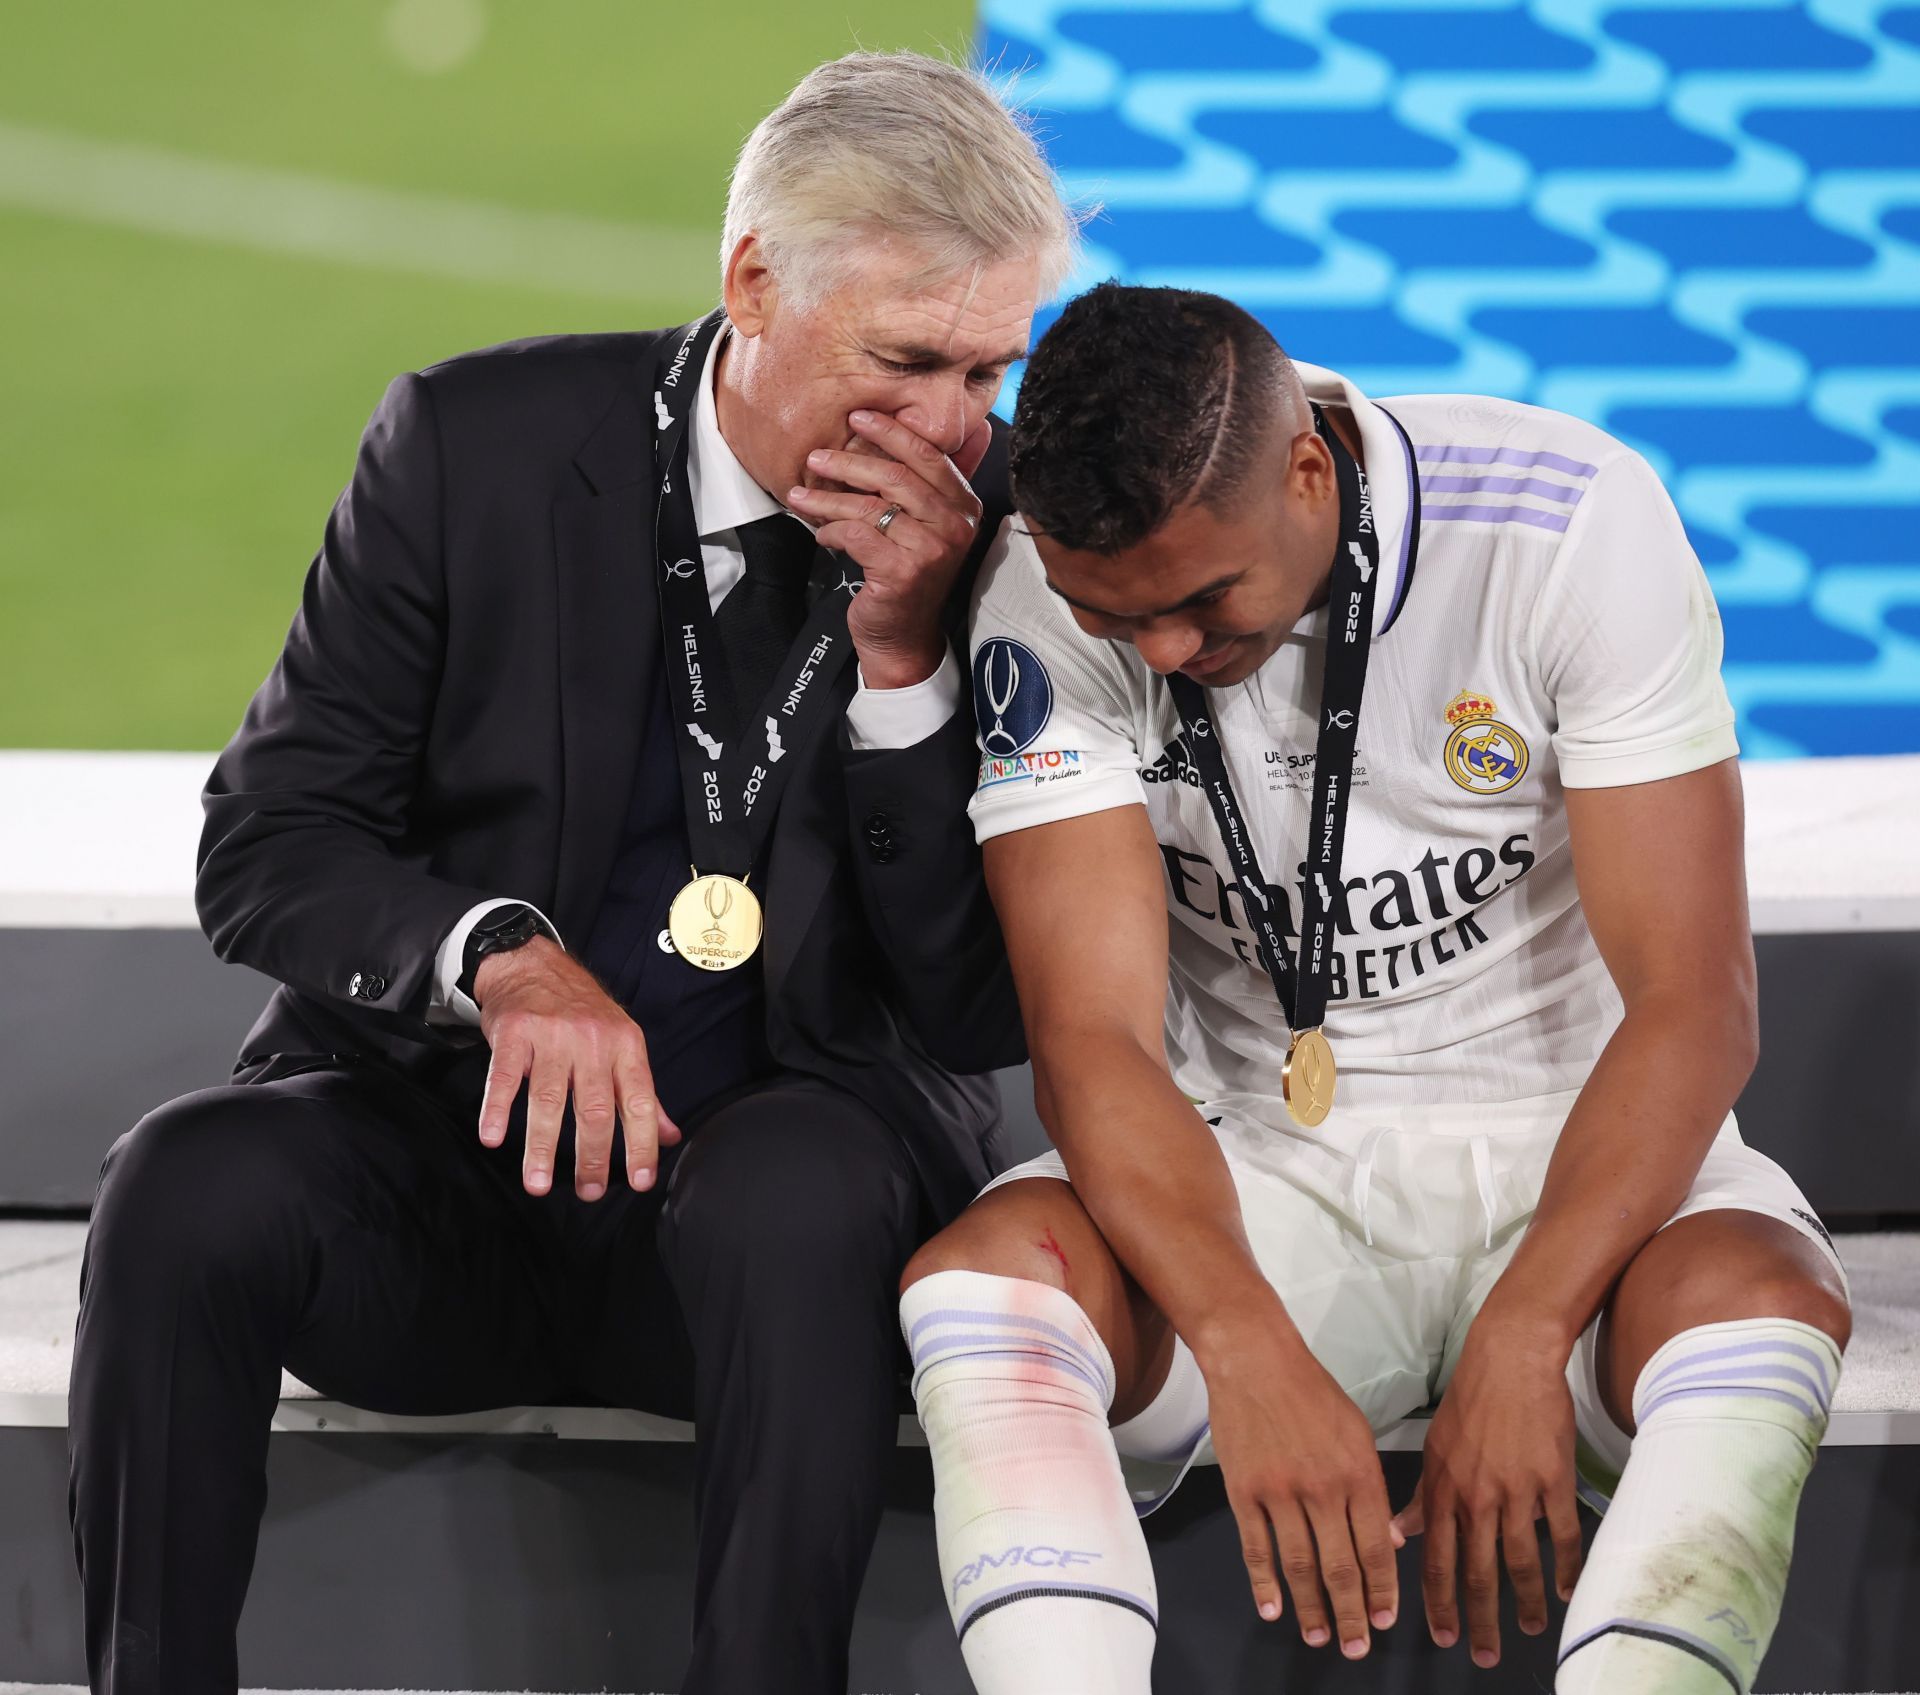 Casemiro could be headed to Manchester United